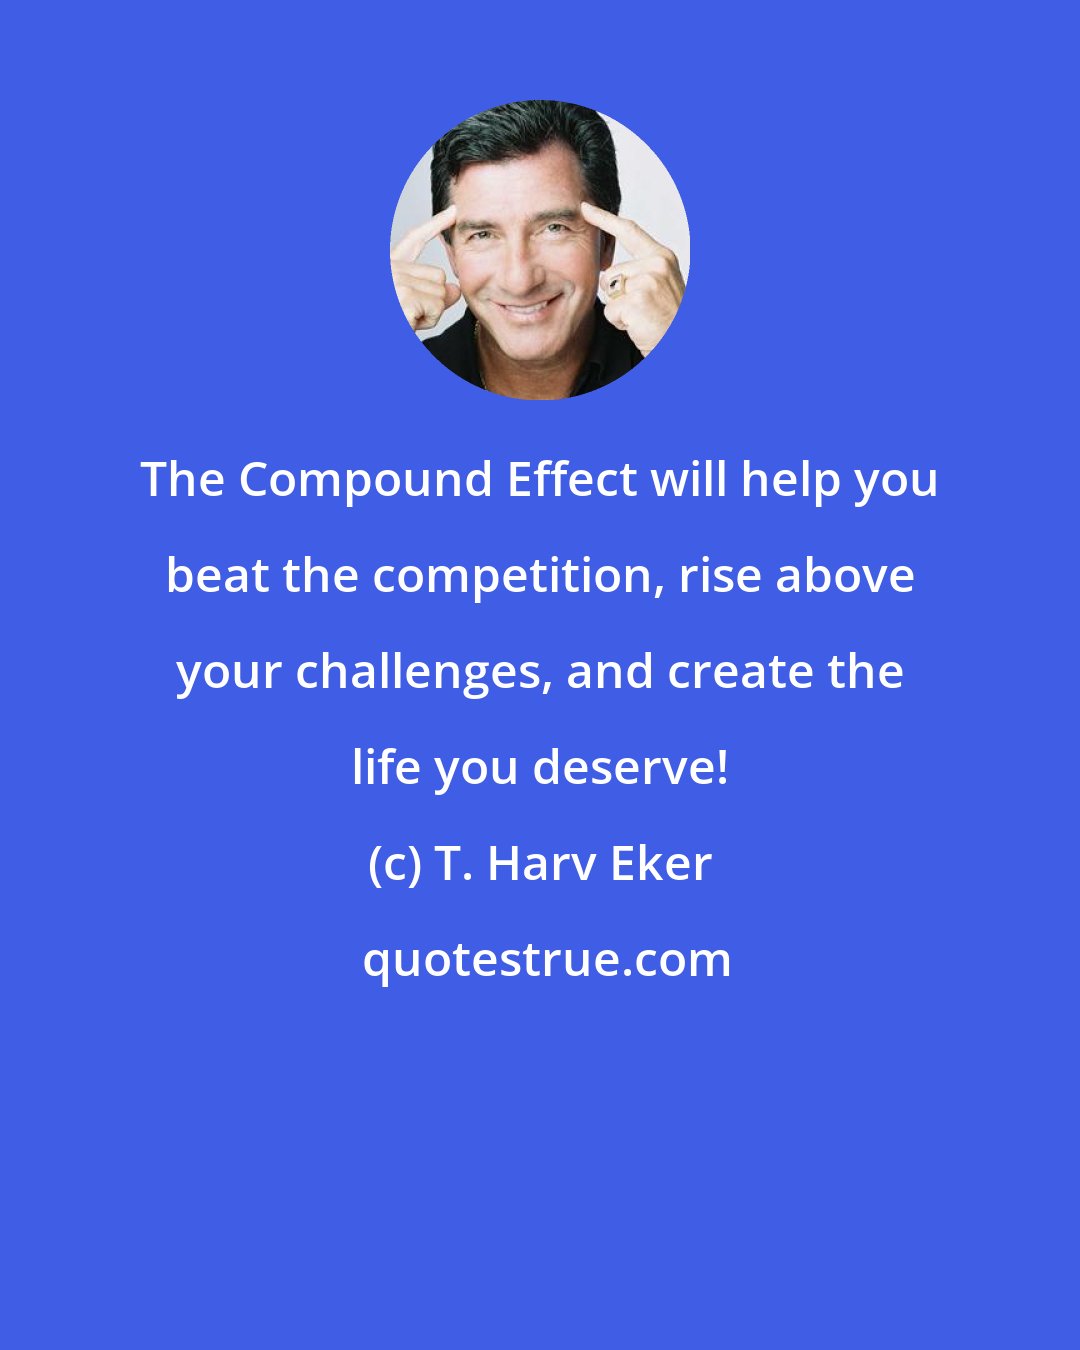 T. Harv Eker: The Compound Effect will help you beat the competition, rise above your challenges, and create the life you deserve!